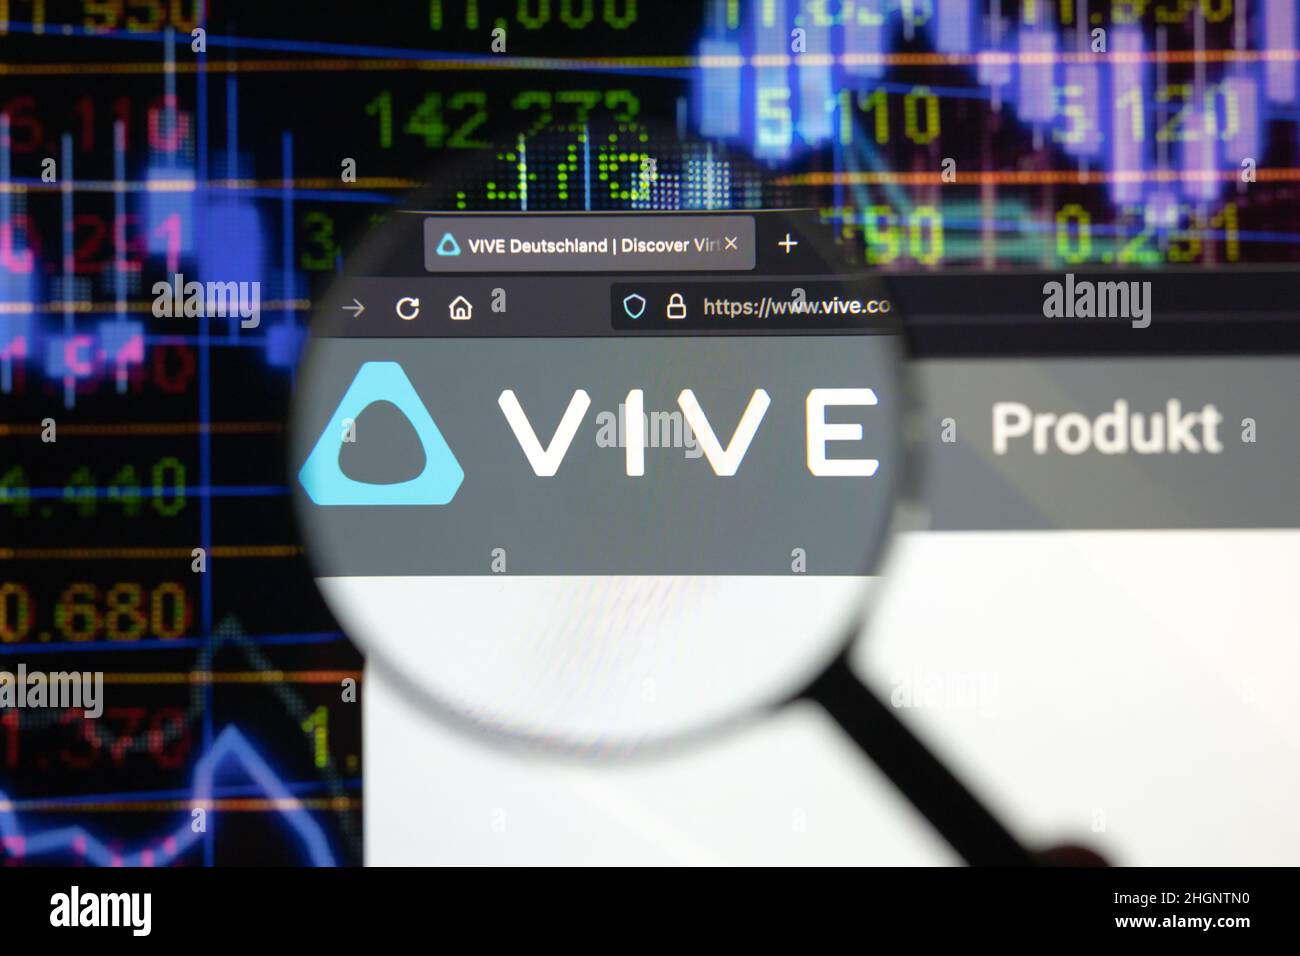 Vive company logo on a website with blurry stock market developments in the background, seen on a computer screen through a magnifying glass. Stock Photo